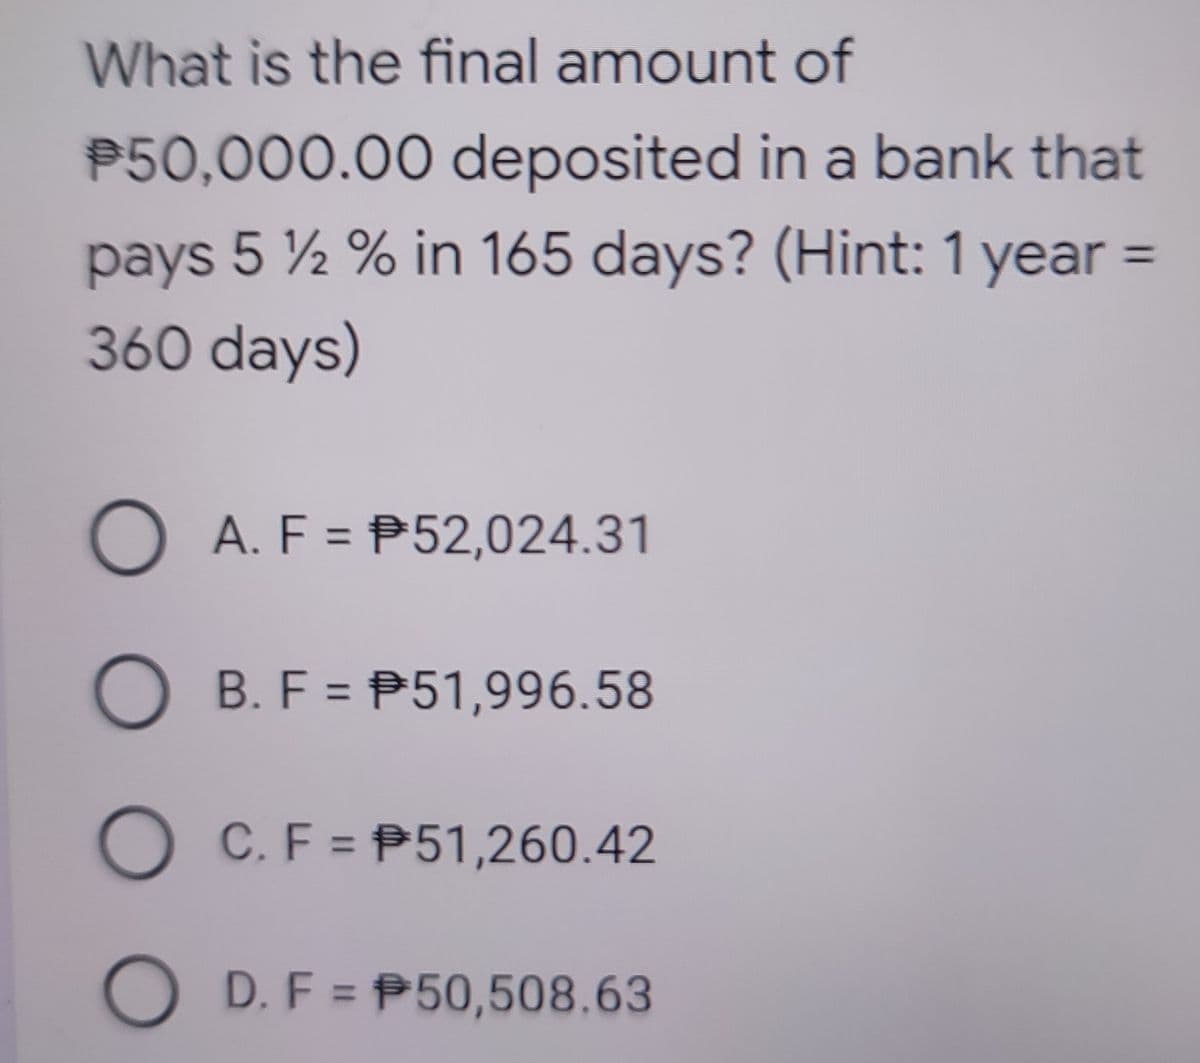 What is the final amount of
P50,000.00 deposited in a bank that
pays 5 ½ % in 165 days? (Hint: 1 year =
360 days)
%3D
O A. F = P52,024.31
%3D
O B. F = P51,996.58
%3D
C. F = P51,260.42
D. F = P50,508.63
O O O
